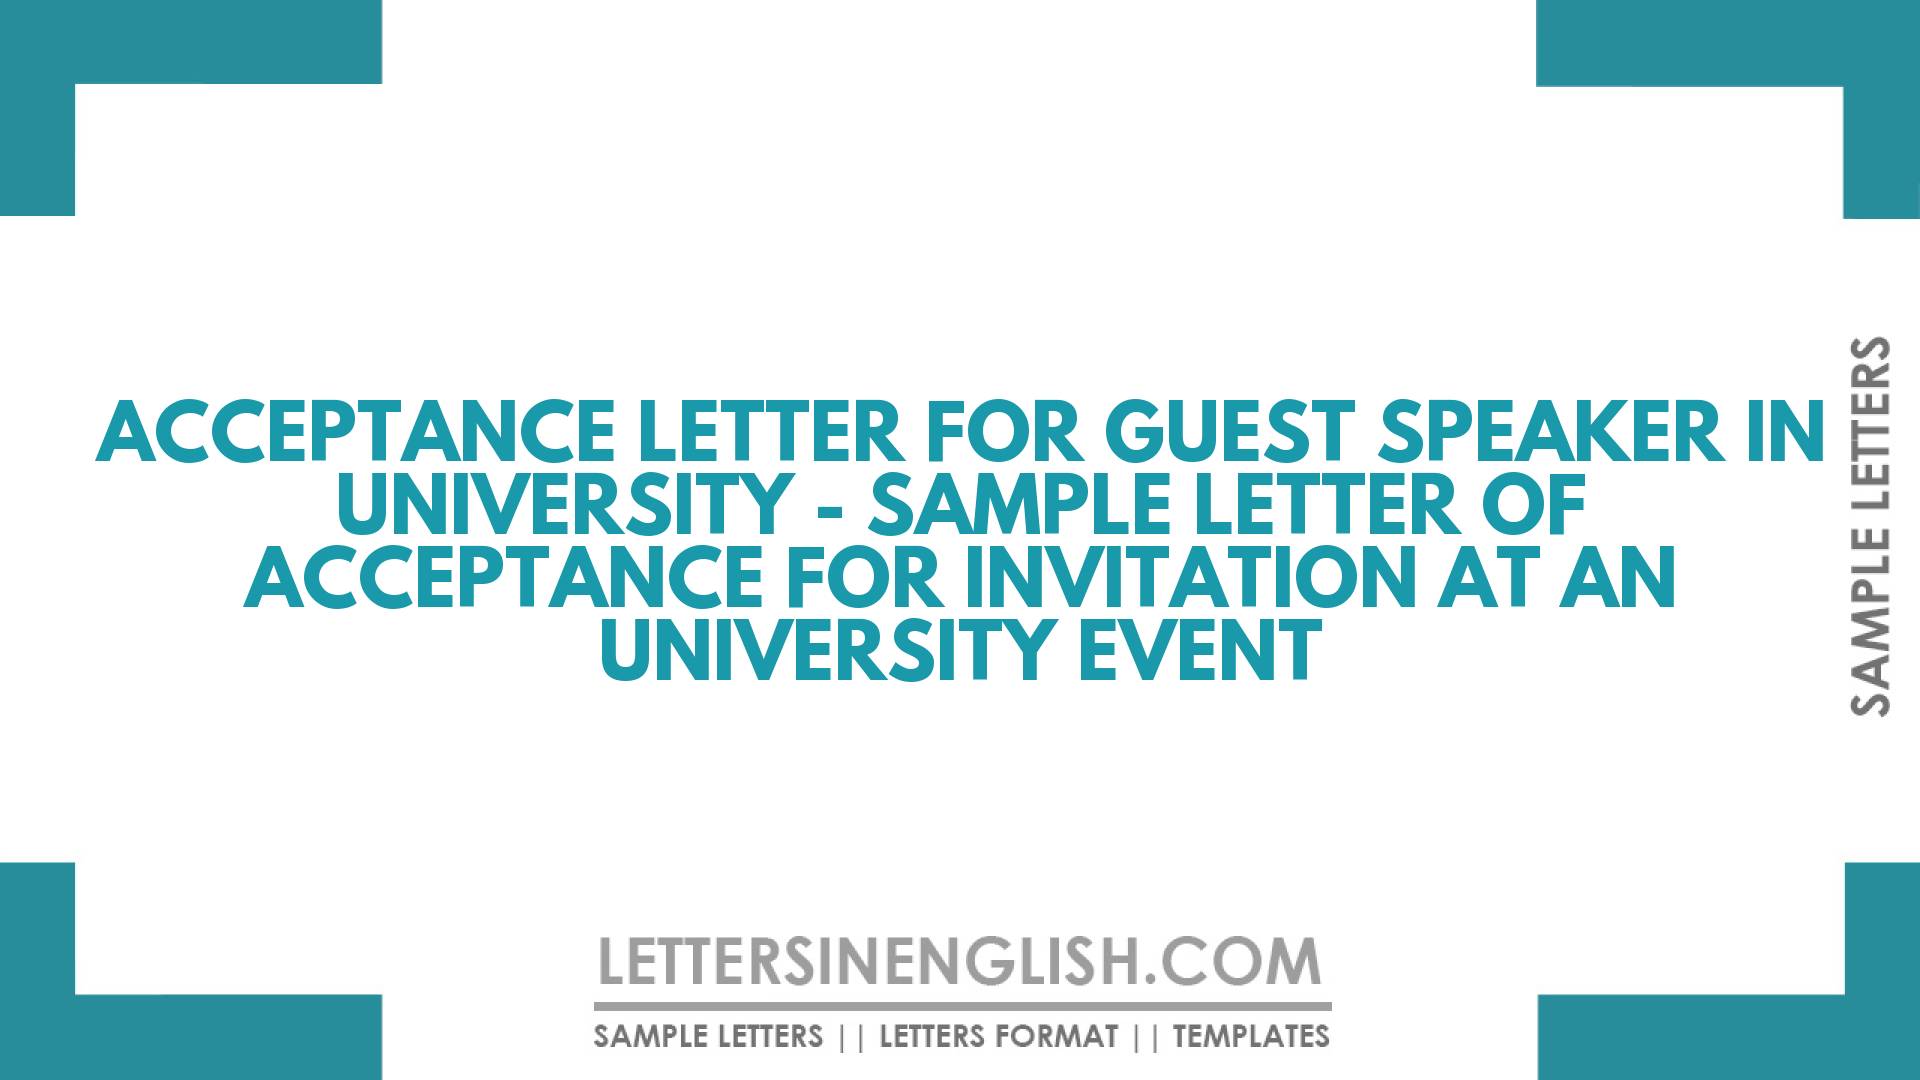 Acceptance Letter for Guest Speaker in University – Sample Letter of Acceptance for Invitation at an University Event